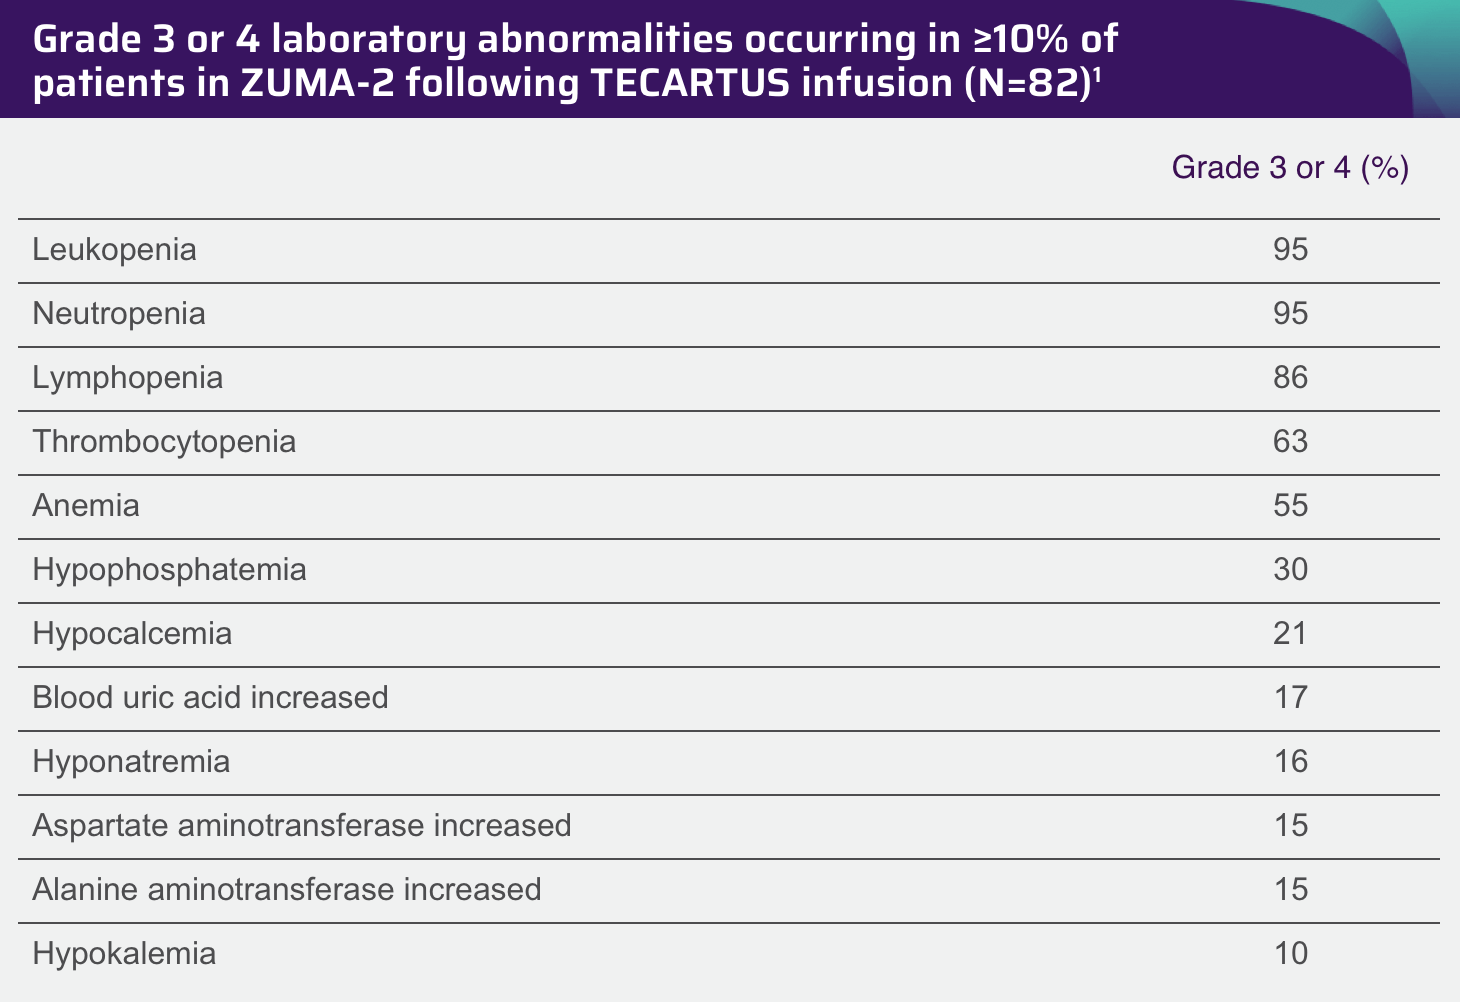 Table showing grade 3 or 4 laboratory abnormalities occurring in ≥ 10% of patients in ZUMA-2 following TECARTUS® infusion (N=82)